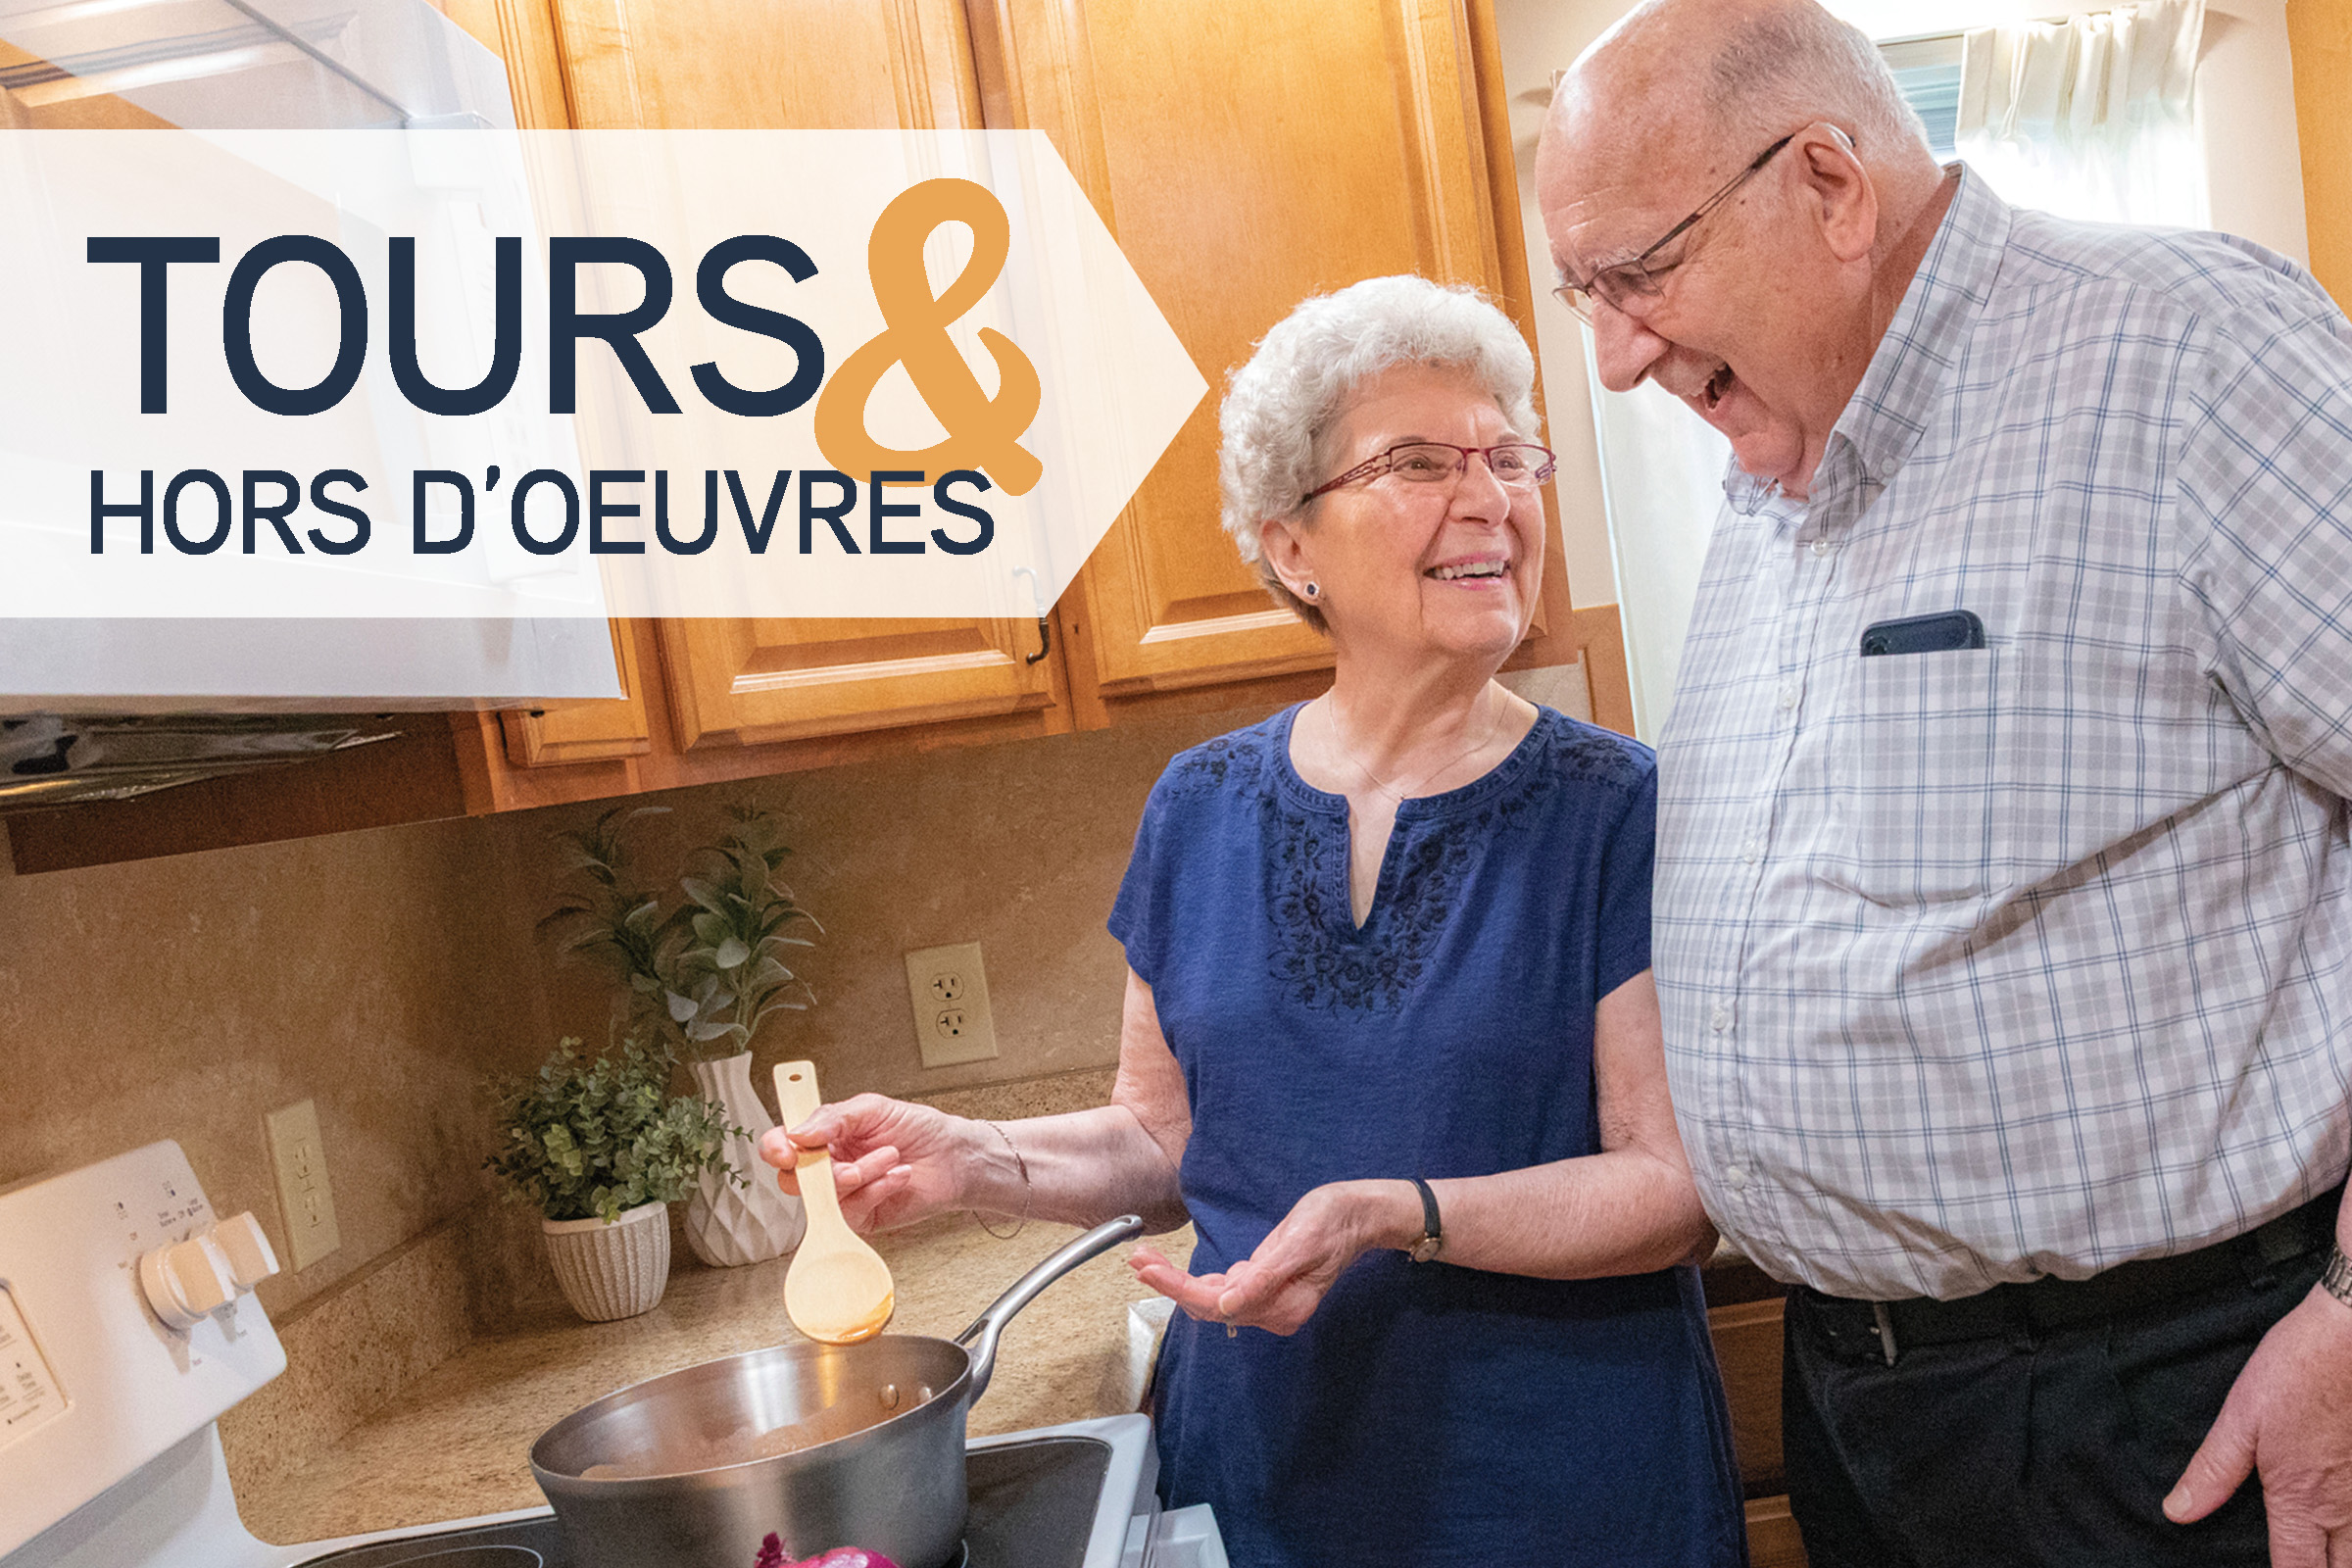 Tours & Hors d'oeuvres